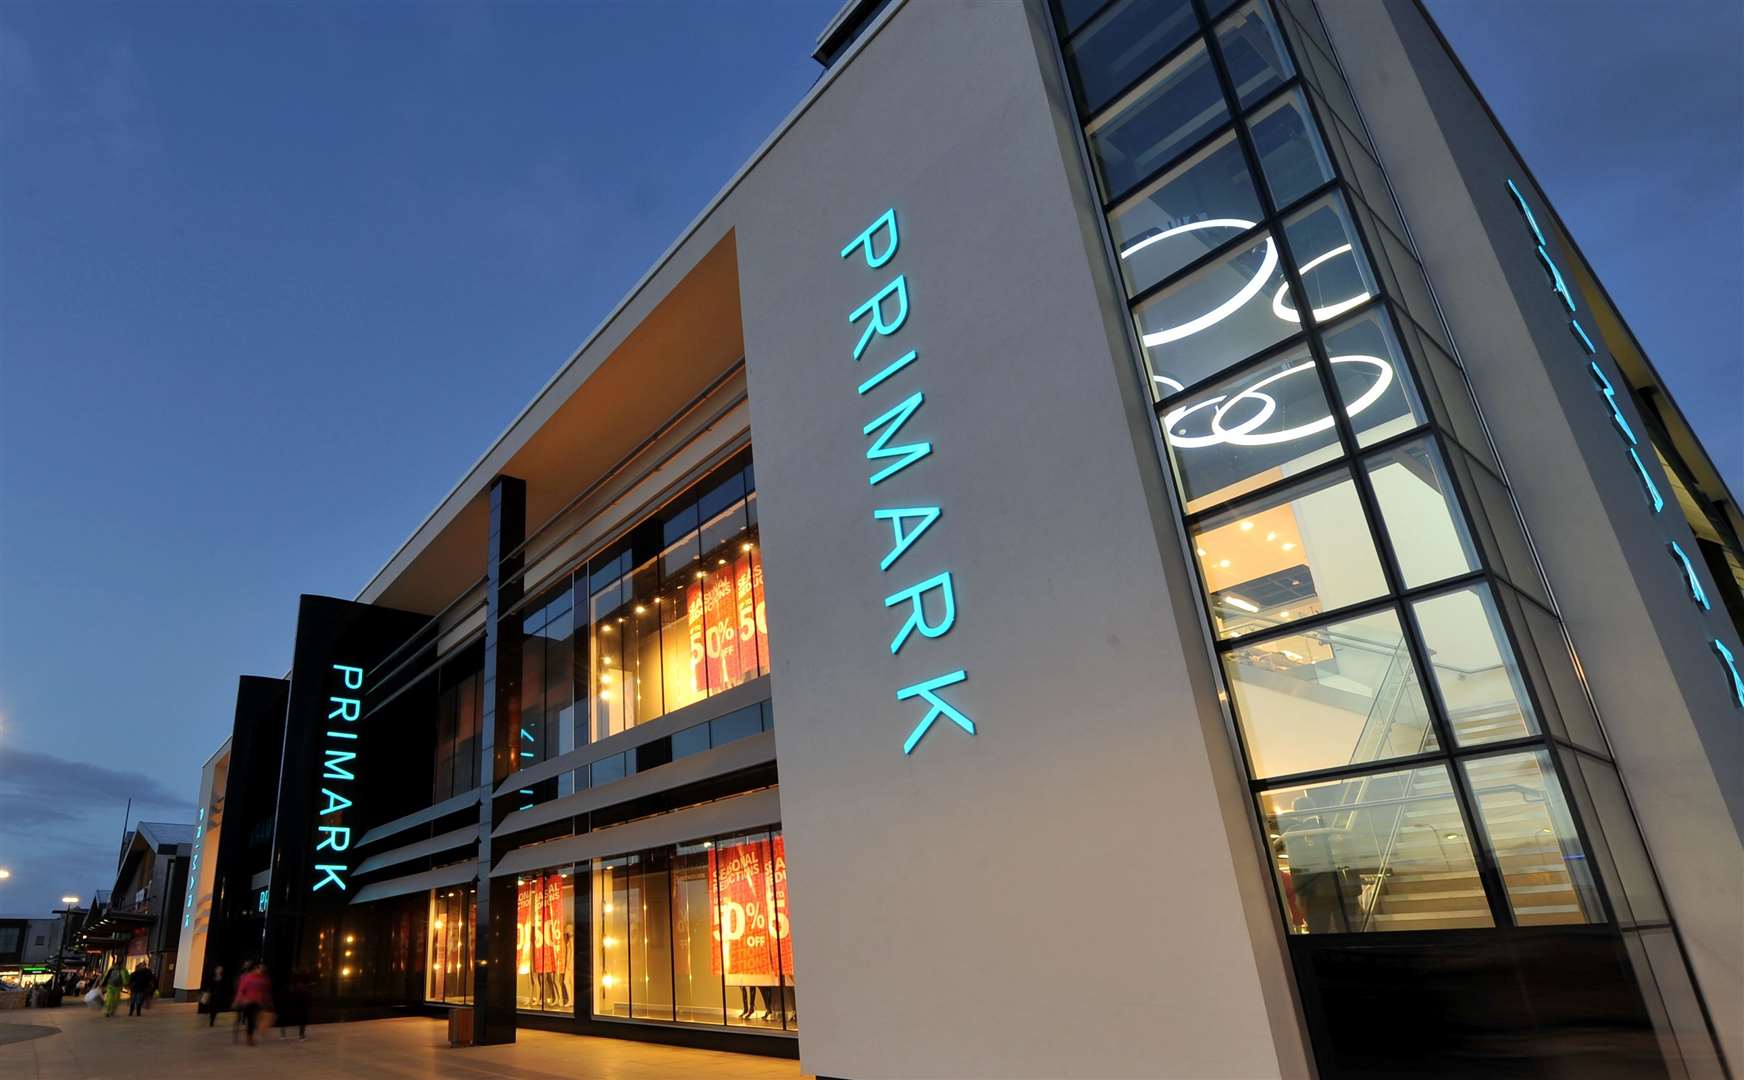 Primark says profits will be hit by a loss of stock. Image: Stock photo.